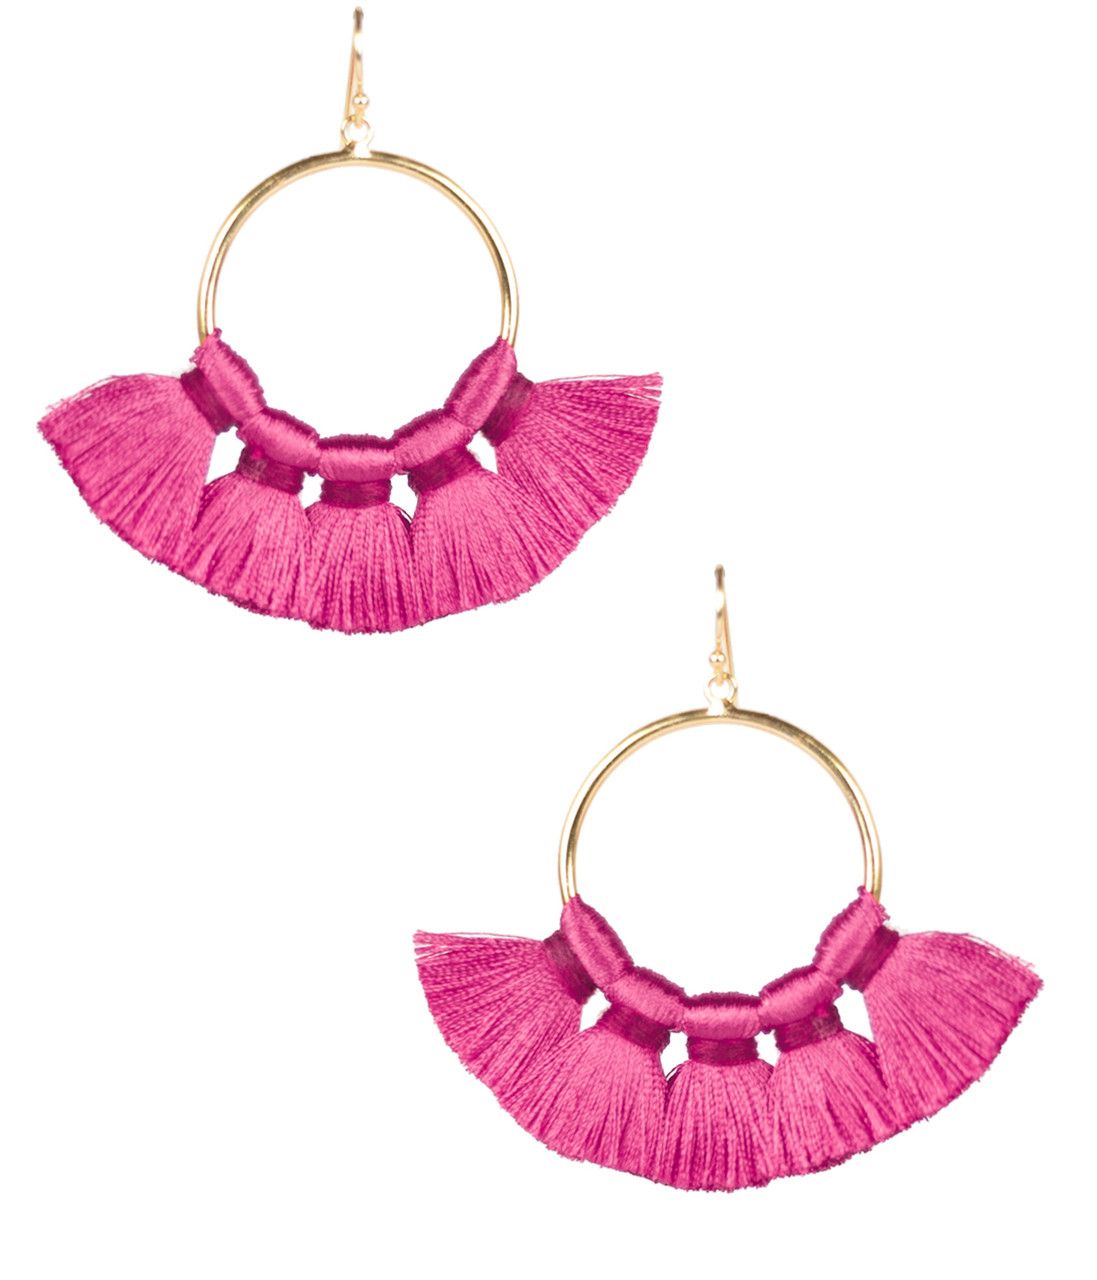 Izzy Gameday Earrings - Miss Pink | Lisi Lerch Inc